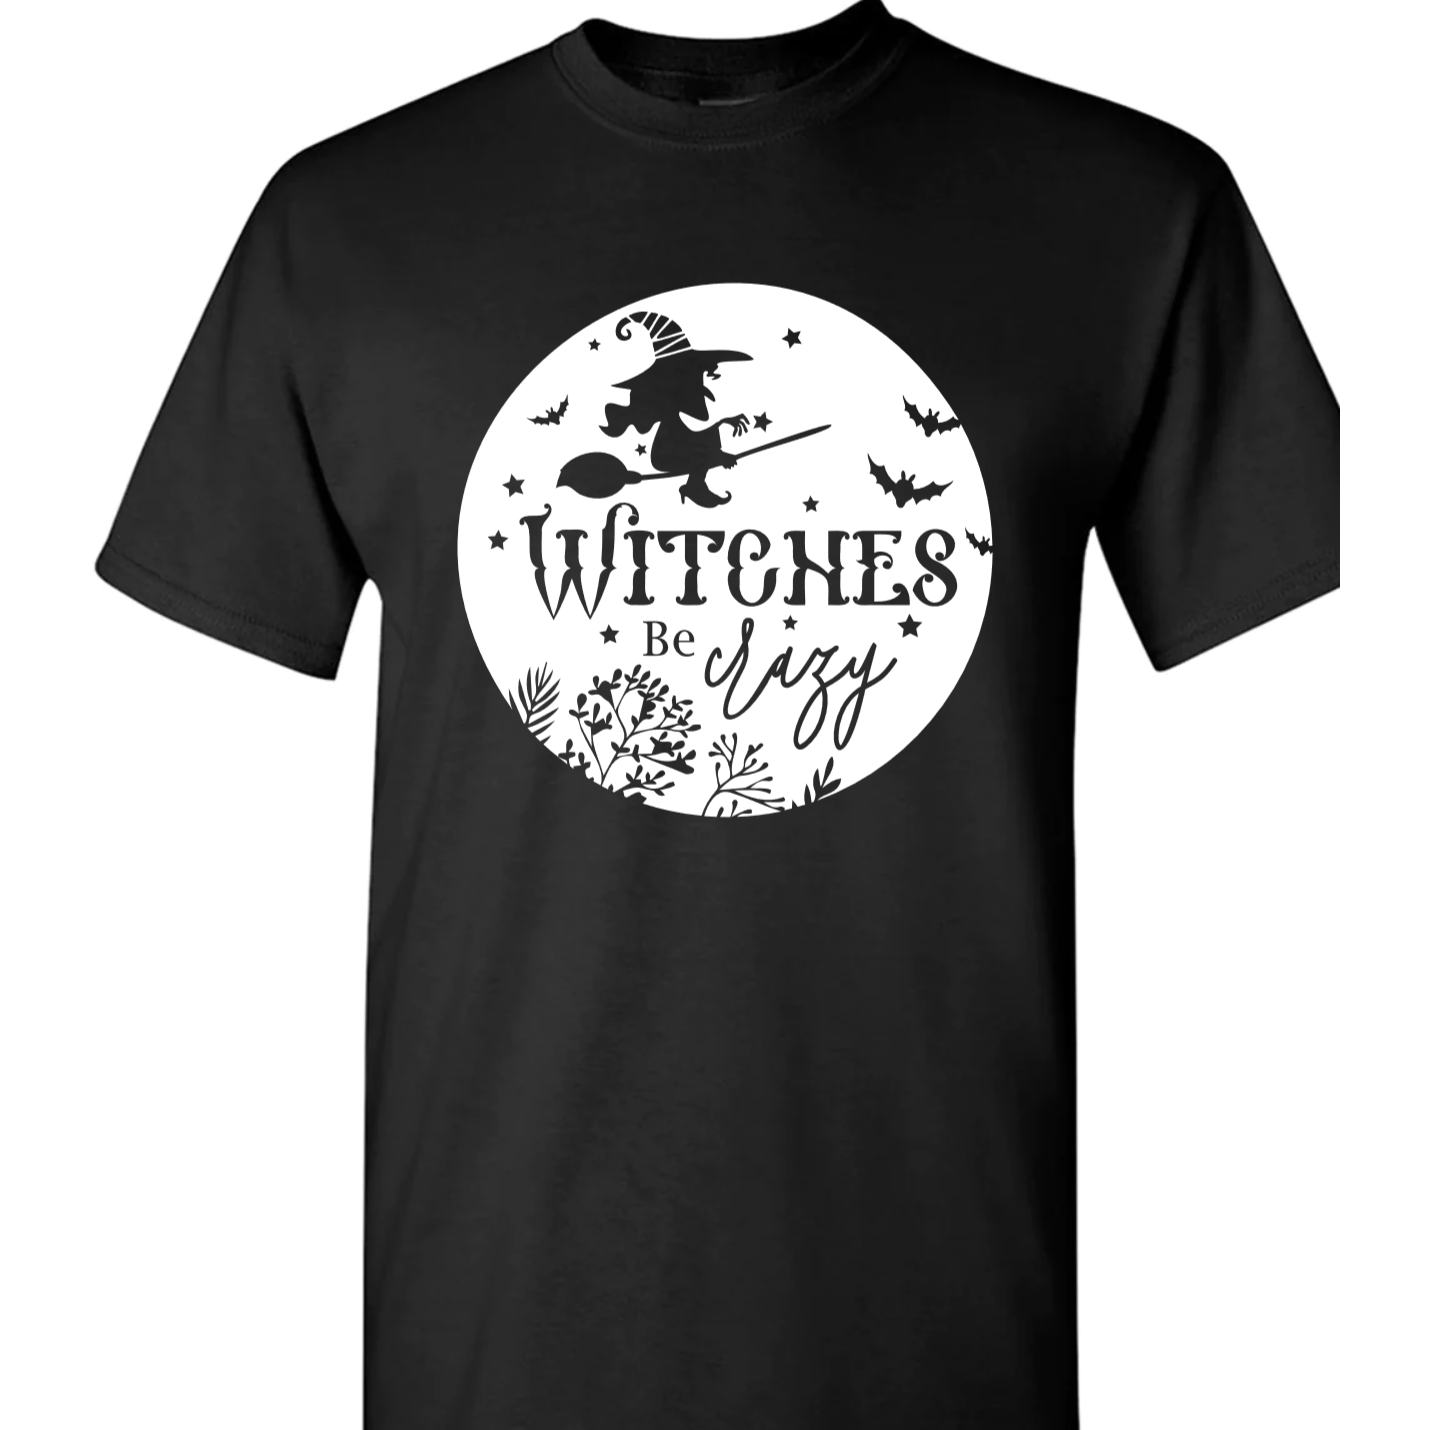 Witches be Crazy Vinyl Graphic for Shirts